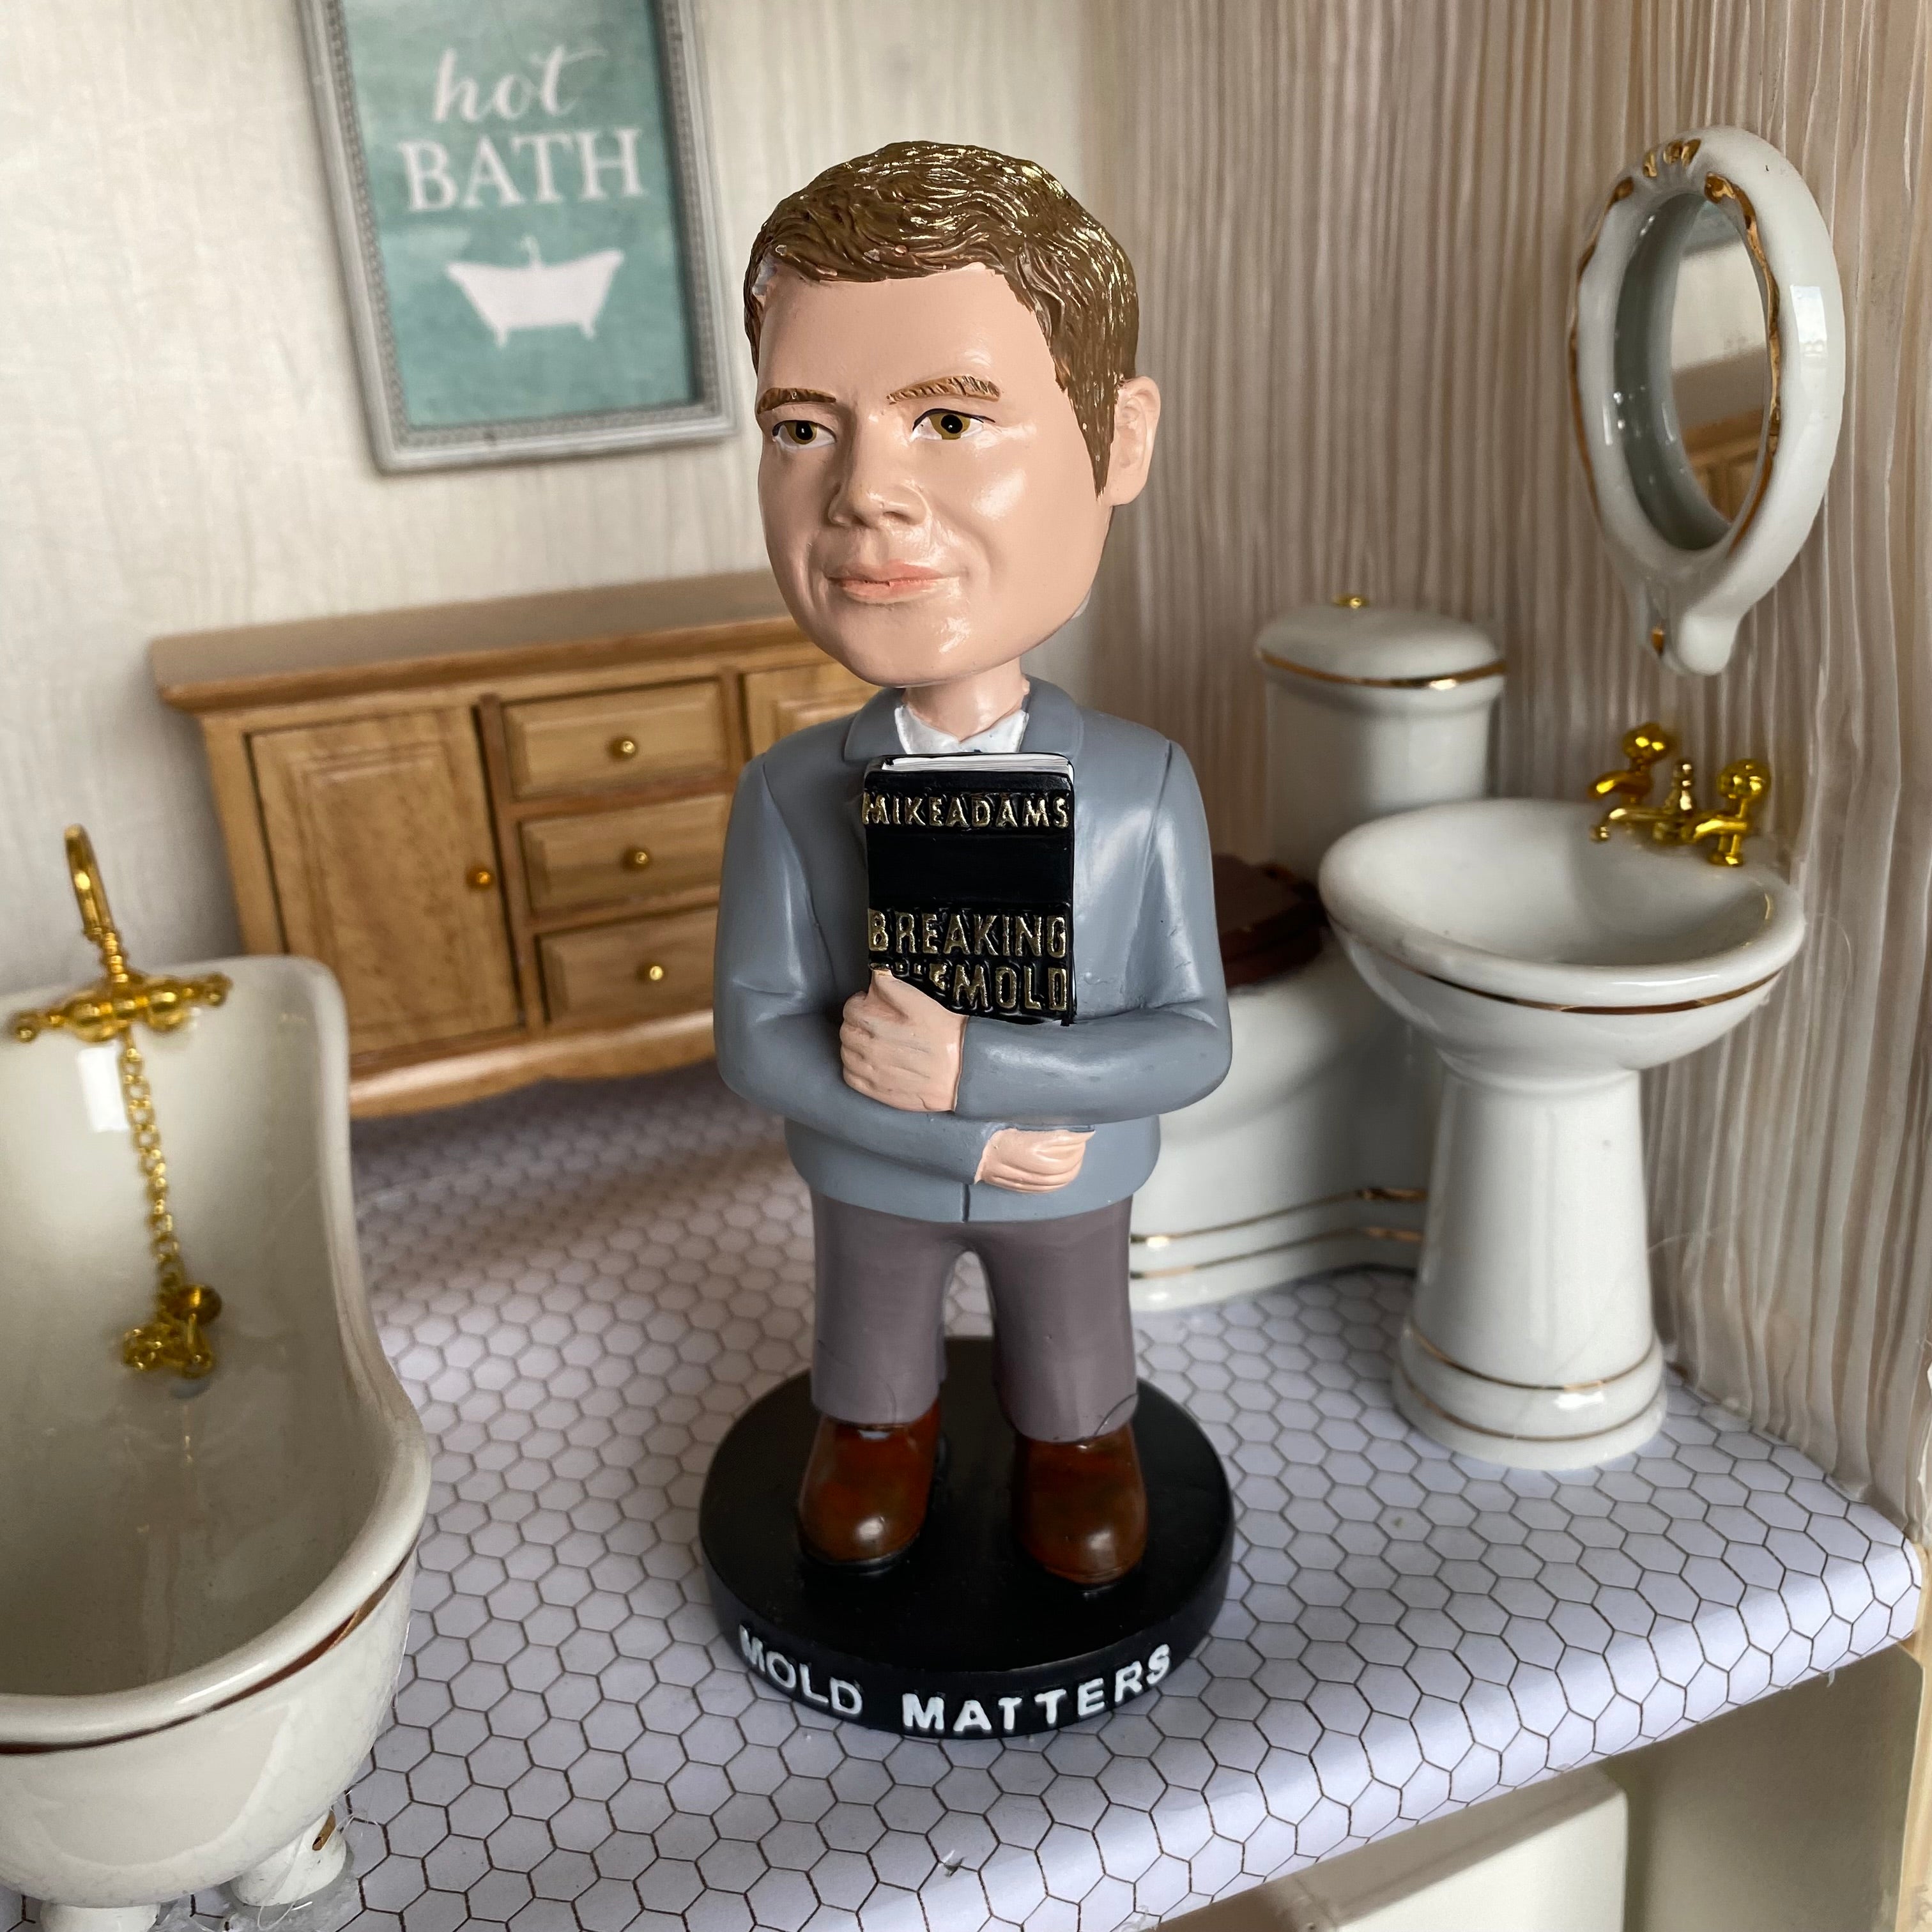 PM Mold Matters T-shirt and Bobble Heads